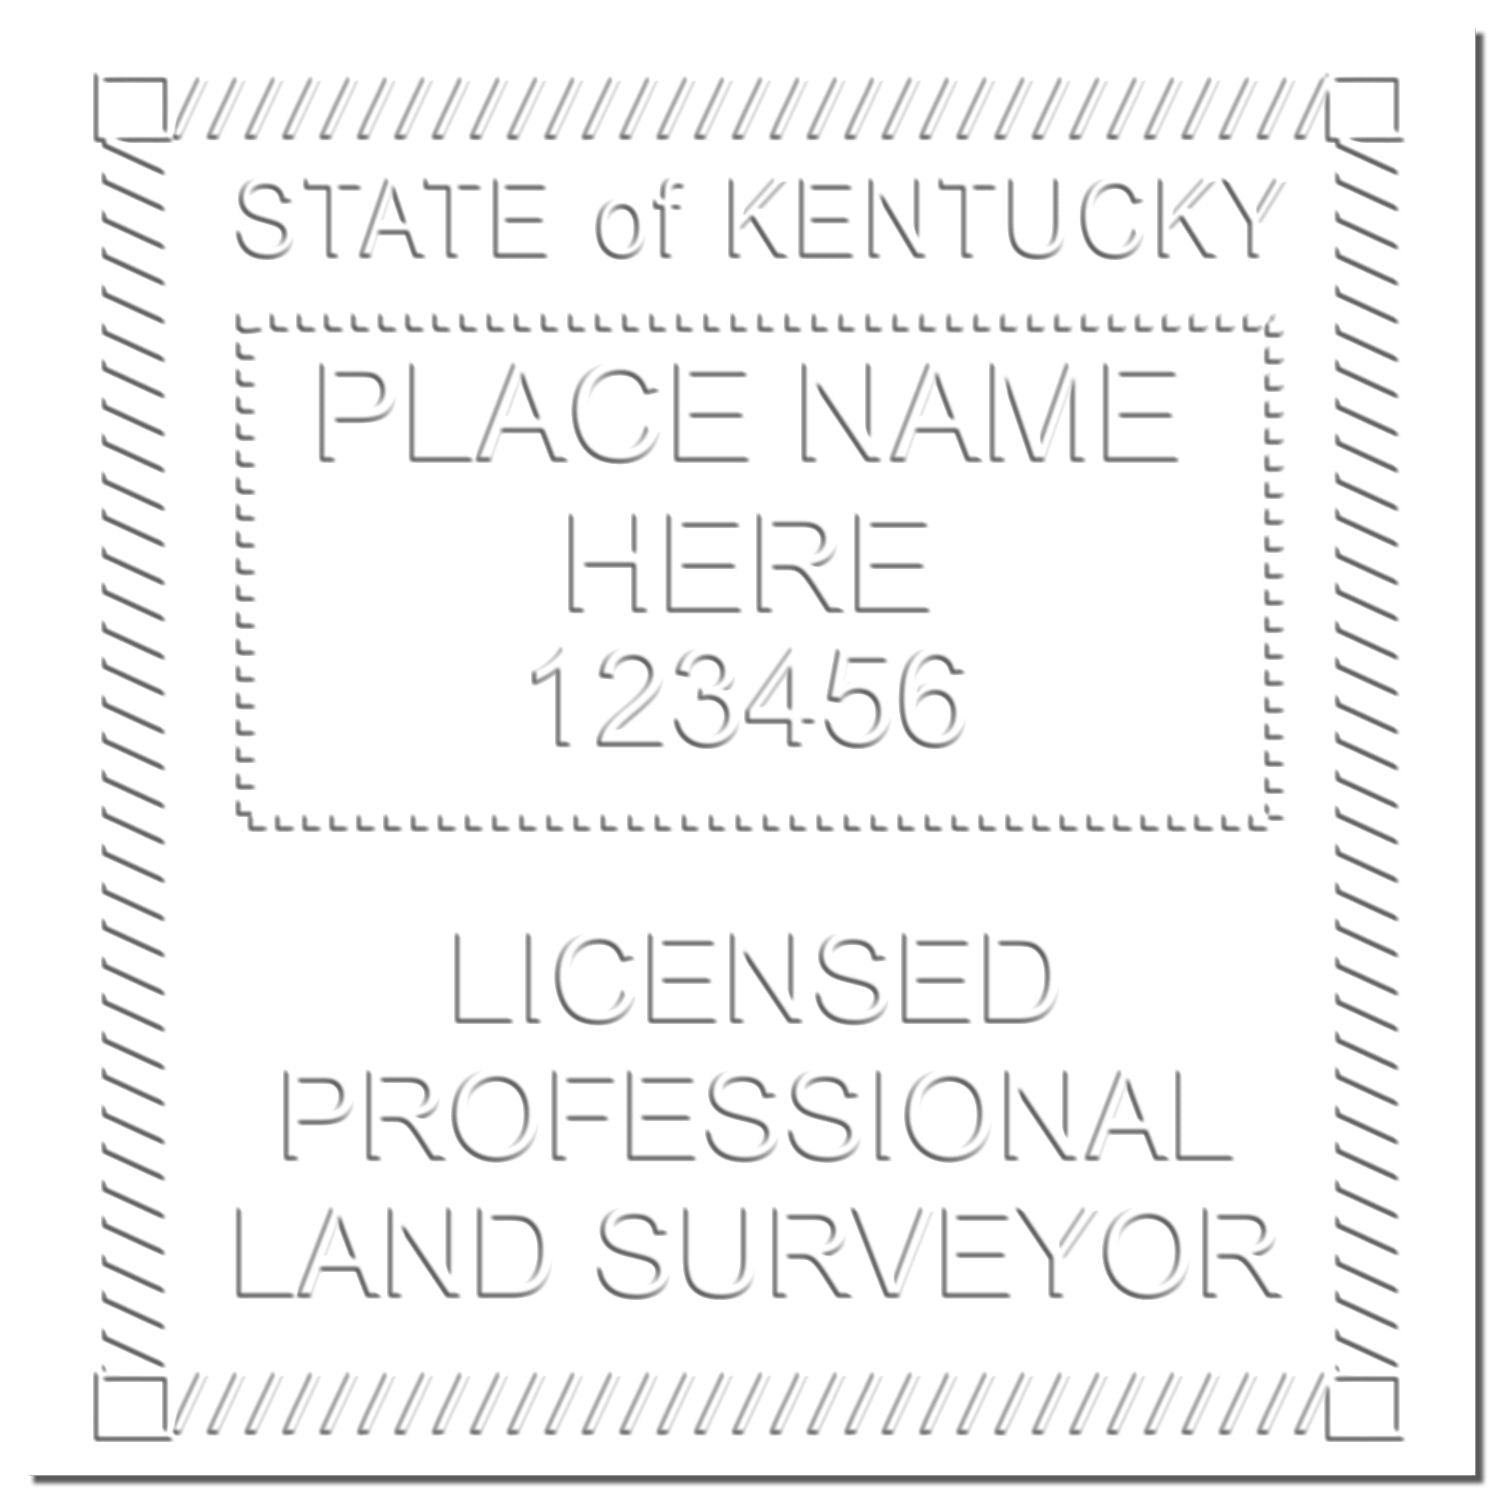 The main image for the Long Reach Kentucky Land Surveyor Seal depicting a sample of the imprint and electronic files